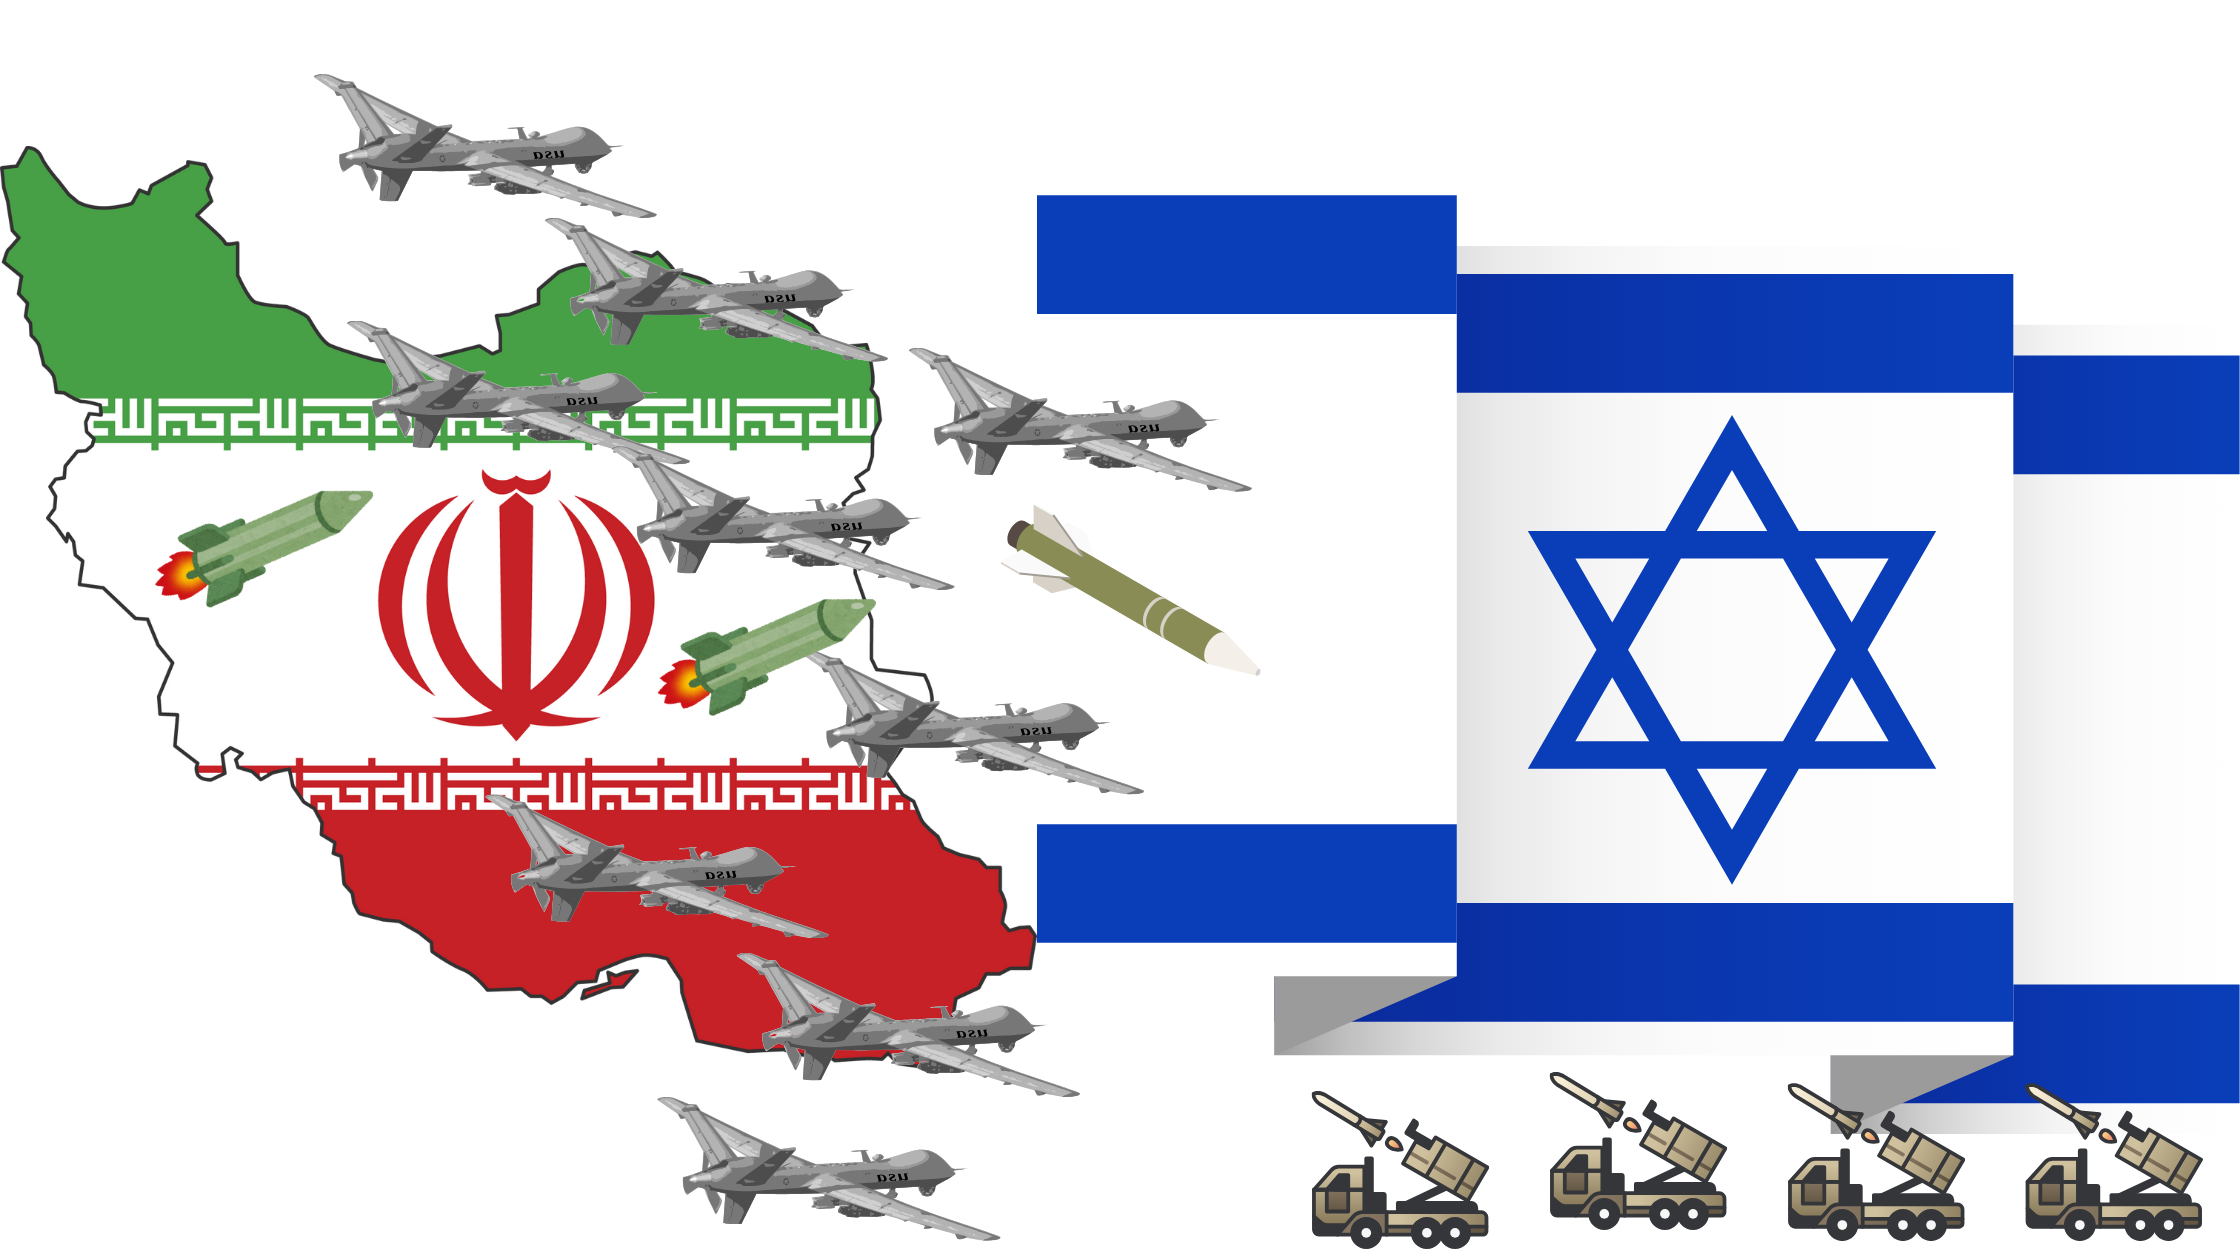 In an unprecedented escalation of tensions, Iran has initiated a large-scale military assault on Israel, employing a combination of over 100 unmanned aerial vehicles (UAVs), commonly known as drones, and several cruise missiles capable of carrying significant payloads. Reports emerging from the region suggest that this aggressive operation might also involve a coordinated attack through Lebanon, leveraging Iran-supported groups stationed there. The drone assault was first reported early this morning, marking a severe increase in the ongoing hostilities between the two nations. Shortly thereafter, sources confirmed the launch of multiple cruise missiles, intensifying concerns over the potential for substantial casualties and structural damage. Israeli defense forces have confirmed their state of high alert and readiness to engage in both defensive and offensive operations to counteract the multi-tiered assault. Anti-missile defense systems, including the renowned Iron Dome, are actively intercepting incoming threats, while ground and air forces are positioned to respond swiftly. The Israeli government has issued an immediate call for all citizens to seek shelter as sirens continue to sound across the country, particularly in regions closest to the Lebanese border and along the coastal areas deemed most vulnerable to cruise missile strikes. In response to the crisis, the United States has unequivocally stated its intention to support Israel. US officials, speaking on condition of anonymity, have expressed that the administration sees this as a critical moment not only to reaffirm its alliance with Israel but also as an opportunity to potentially take more direct action against Iran. "We have been clear that we will stand with Israel. We are closely monitoring the situation and are prepared to act to defend our interests and our allies in the region," one official stated. International reactions have been swift, with global leaders calling for an immediate cessation of hostilities and the initiation of diplomatic talks to prevent further escalation. The United Nations Security Council is set to convene an emergency session to address the crisis, with several member states urging for a robust international response to what is seen as an overt act of aggression. The motive behind Iran's strategy remains subject to speculation, though analysts suggest that the simultaneous use of drones, missiles, and proxy forces could be aimed at overwhelming Israeli defensive capabilities, signaling a significant shift in Iran’s military tactics against its longtime adversary. As the situation unfolds, the international community watches closely, hoping for a resolution that can avert a broader conflict in the already volatile Middle East region. The outcome of this confrontation could redefine regional power dynamics and influence global geopolitical alignments for years to come.